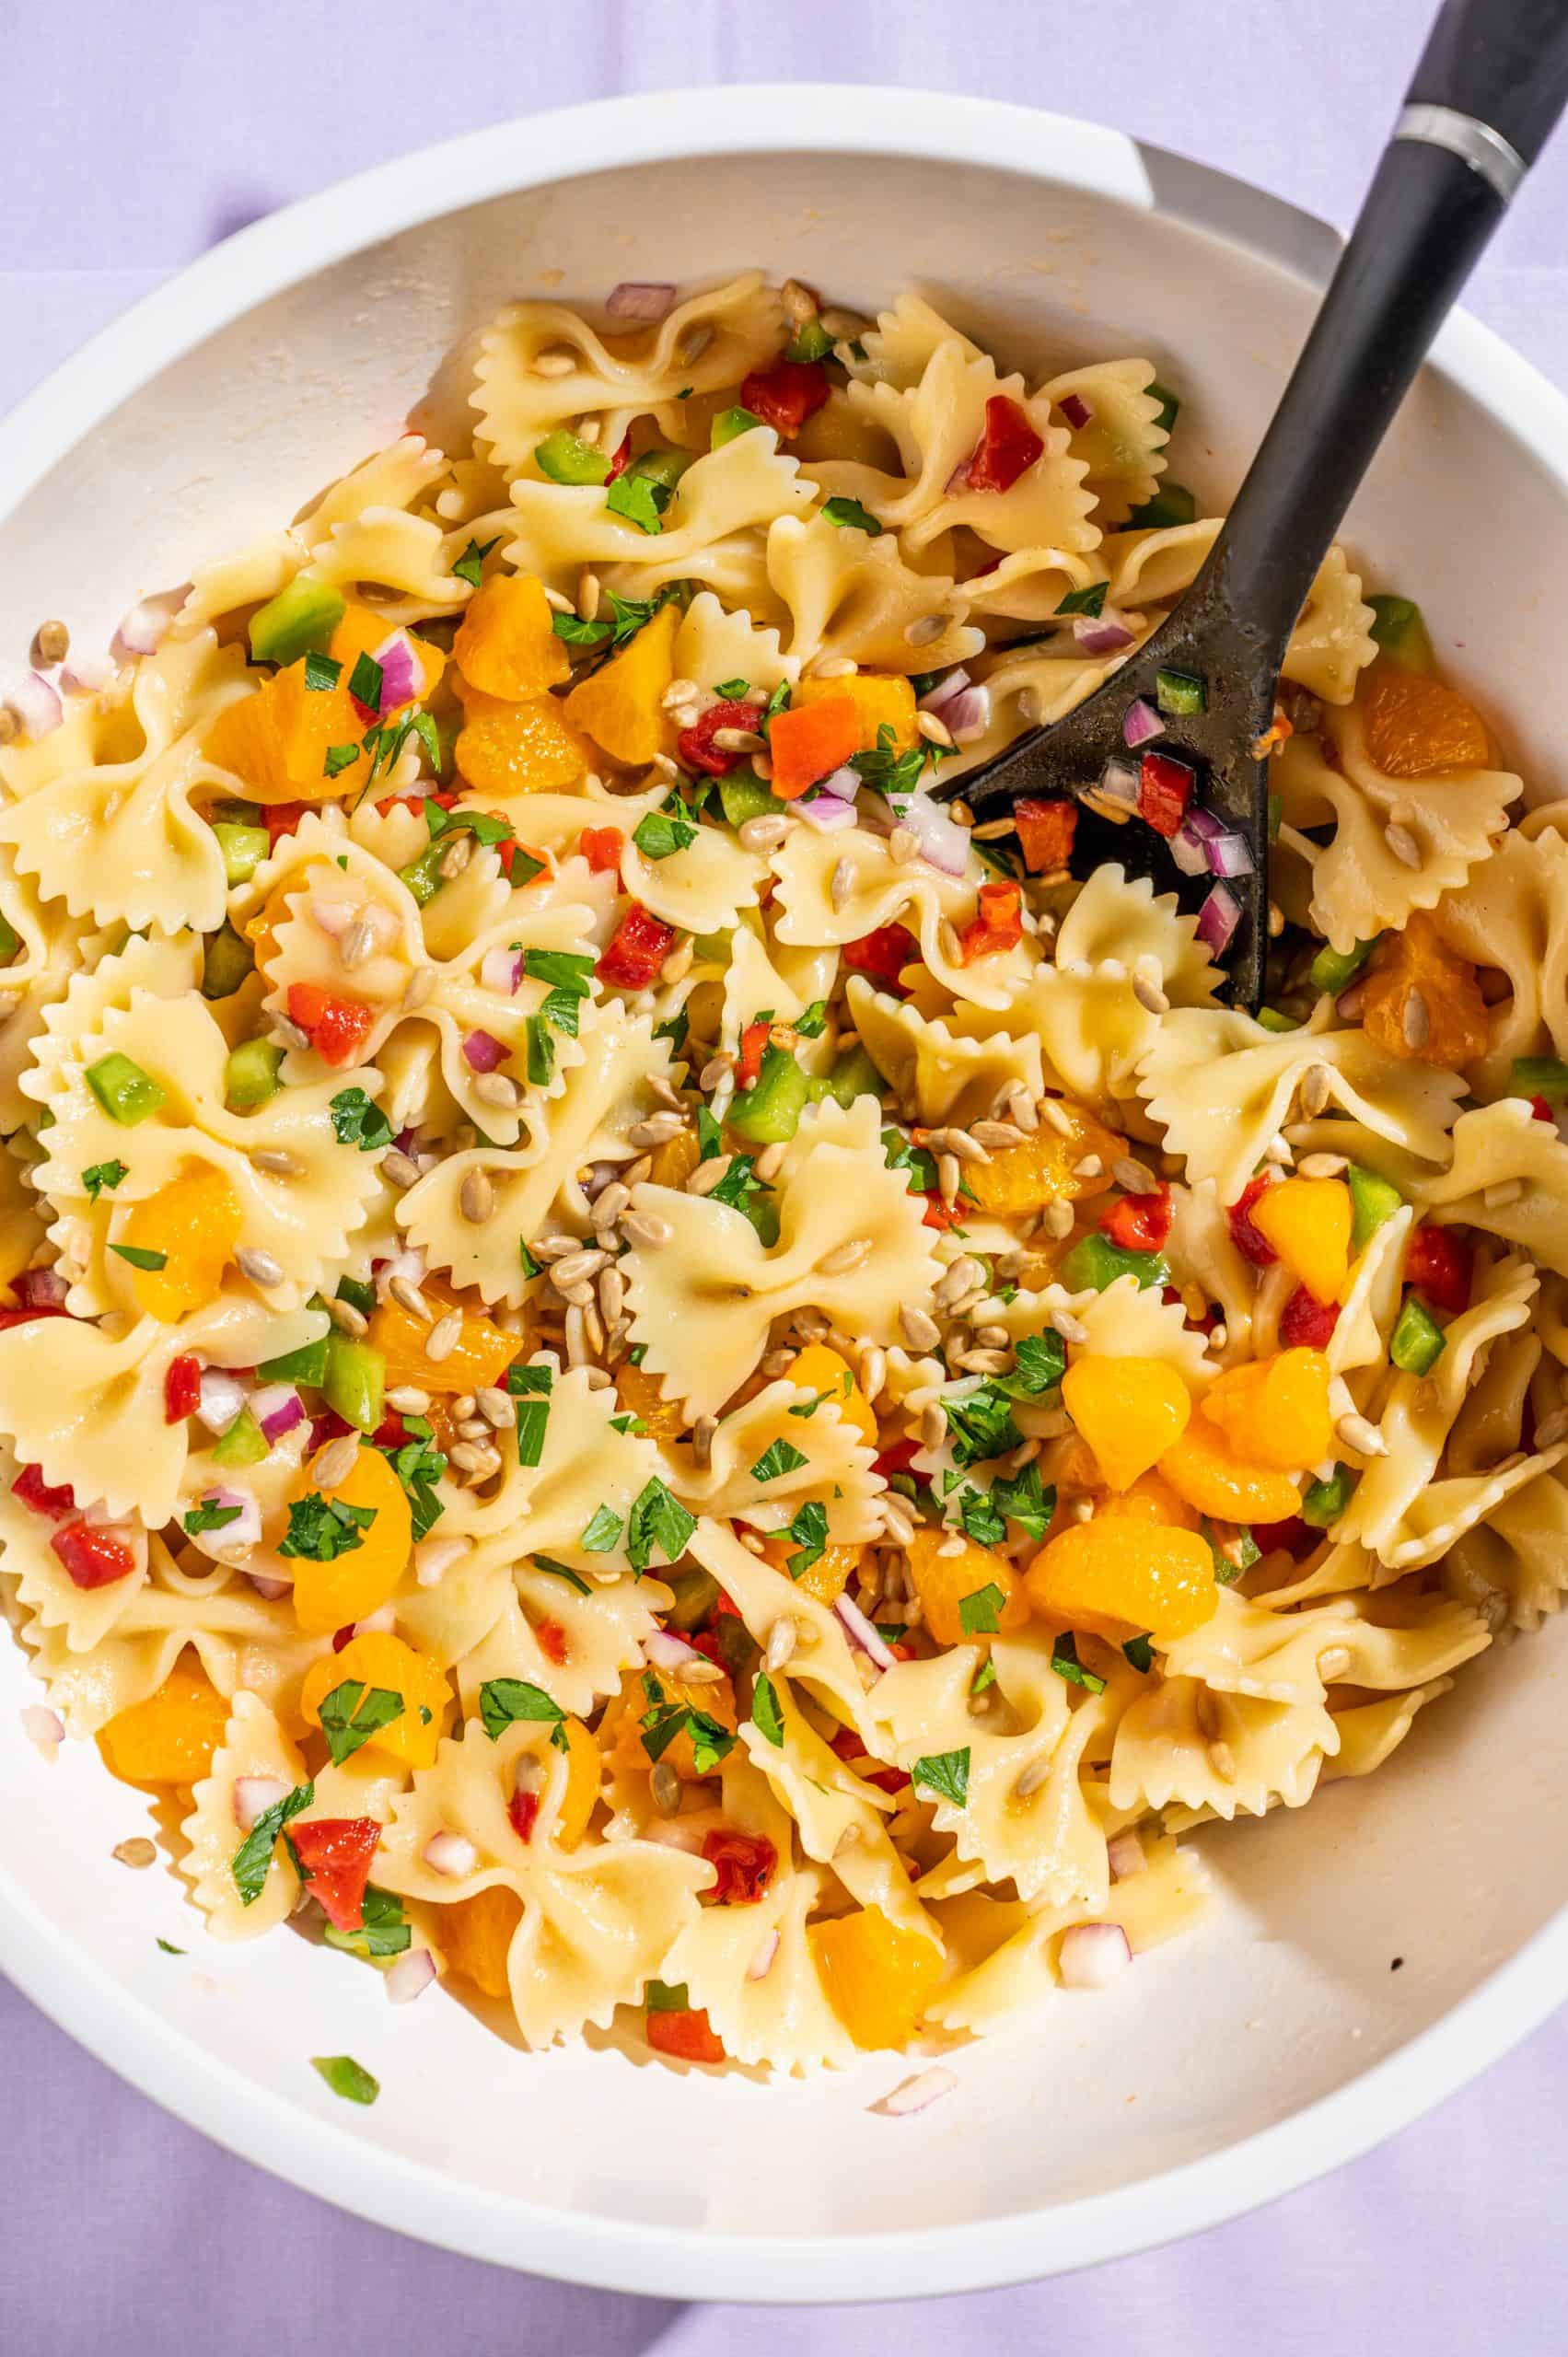 A large bowl of pasta salad after tossing pasta and other ingredients with honey vinaigrette.